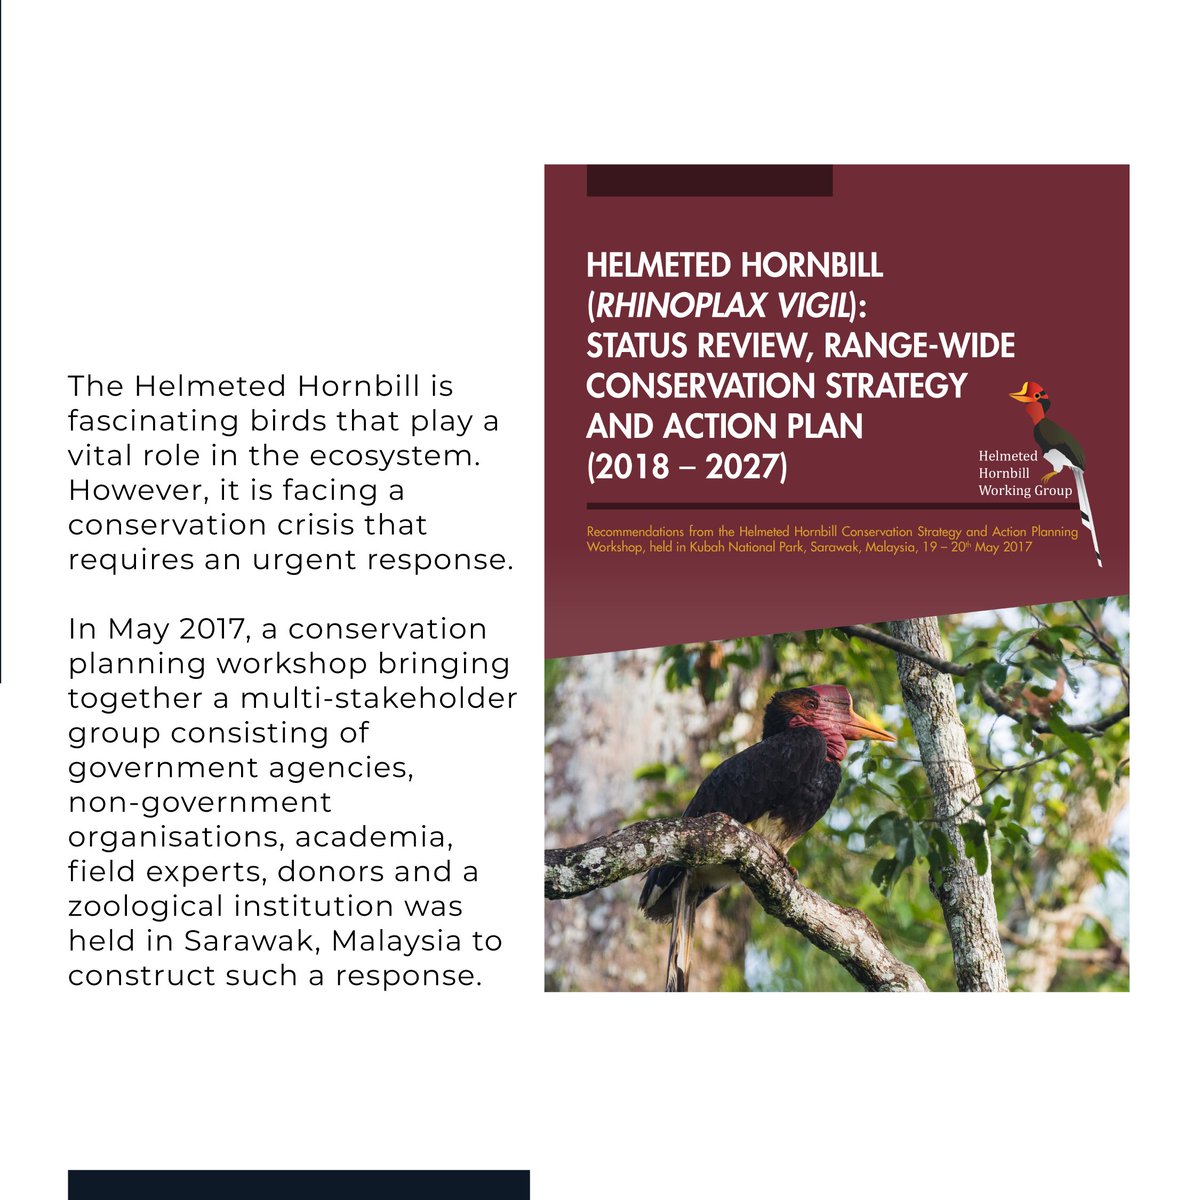 Hello hornbill friends! 👋 Have you had a chance to read the 10-Year Conservation Strategy and Action Plan by the Helmeted Hornbill Working Group (HHWG)? You can visit iucnhornbills.org/helmeted-hornb… to download and learn more about the HHWG's conservation strategy and plans.